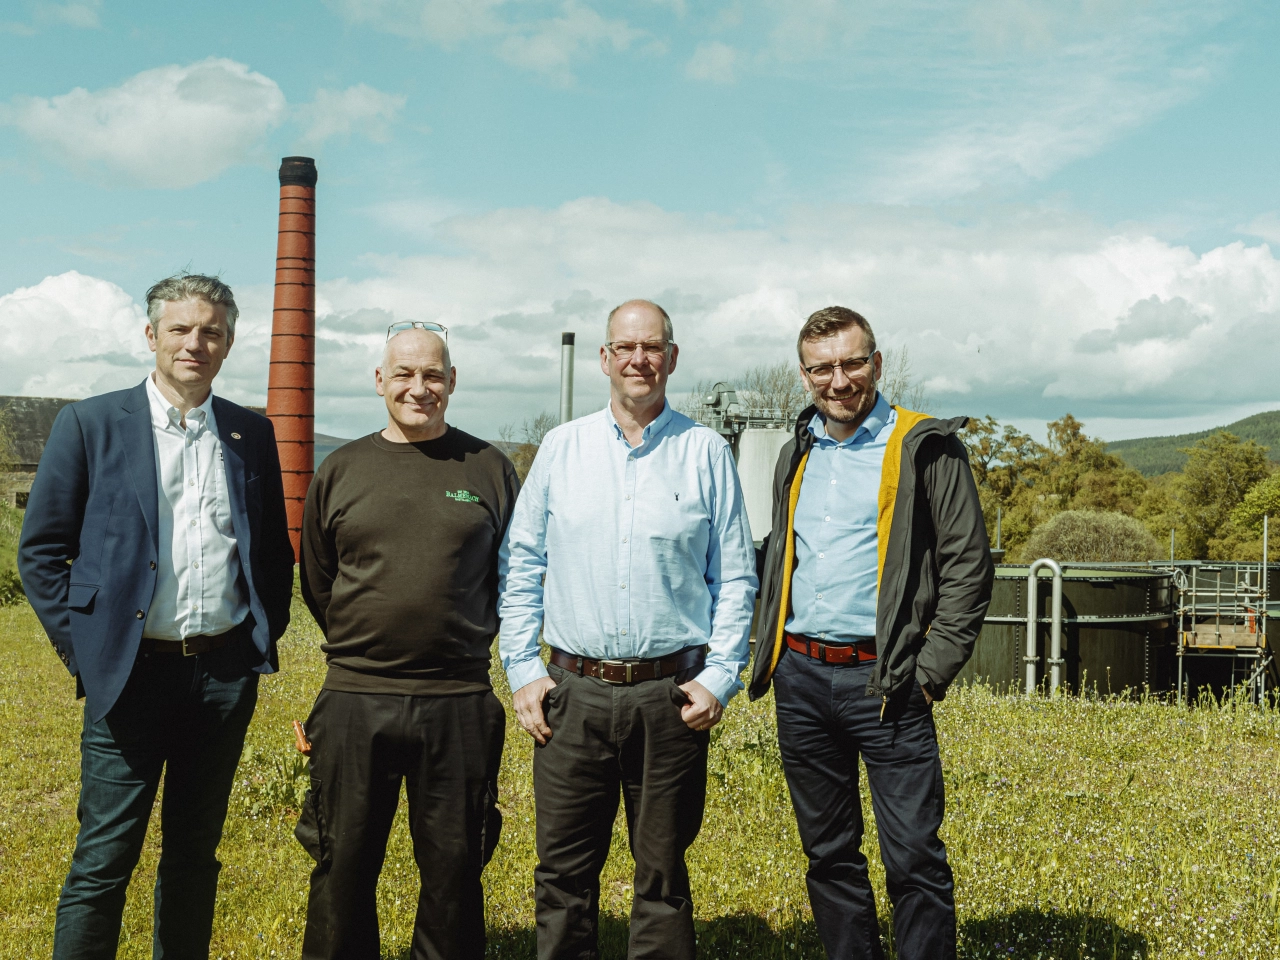 Anaerobic digestion plant installed at Balmenach Whisky and Gin distillery in a £4M Upgrade